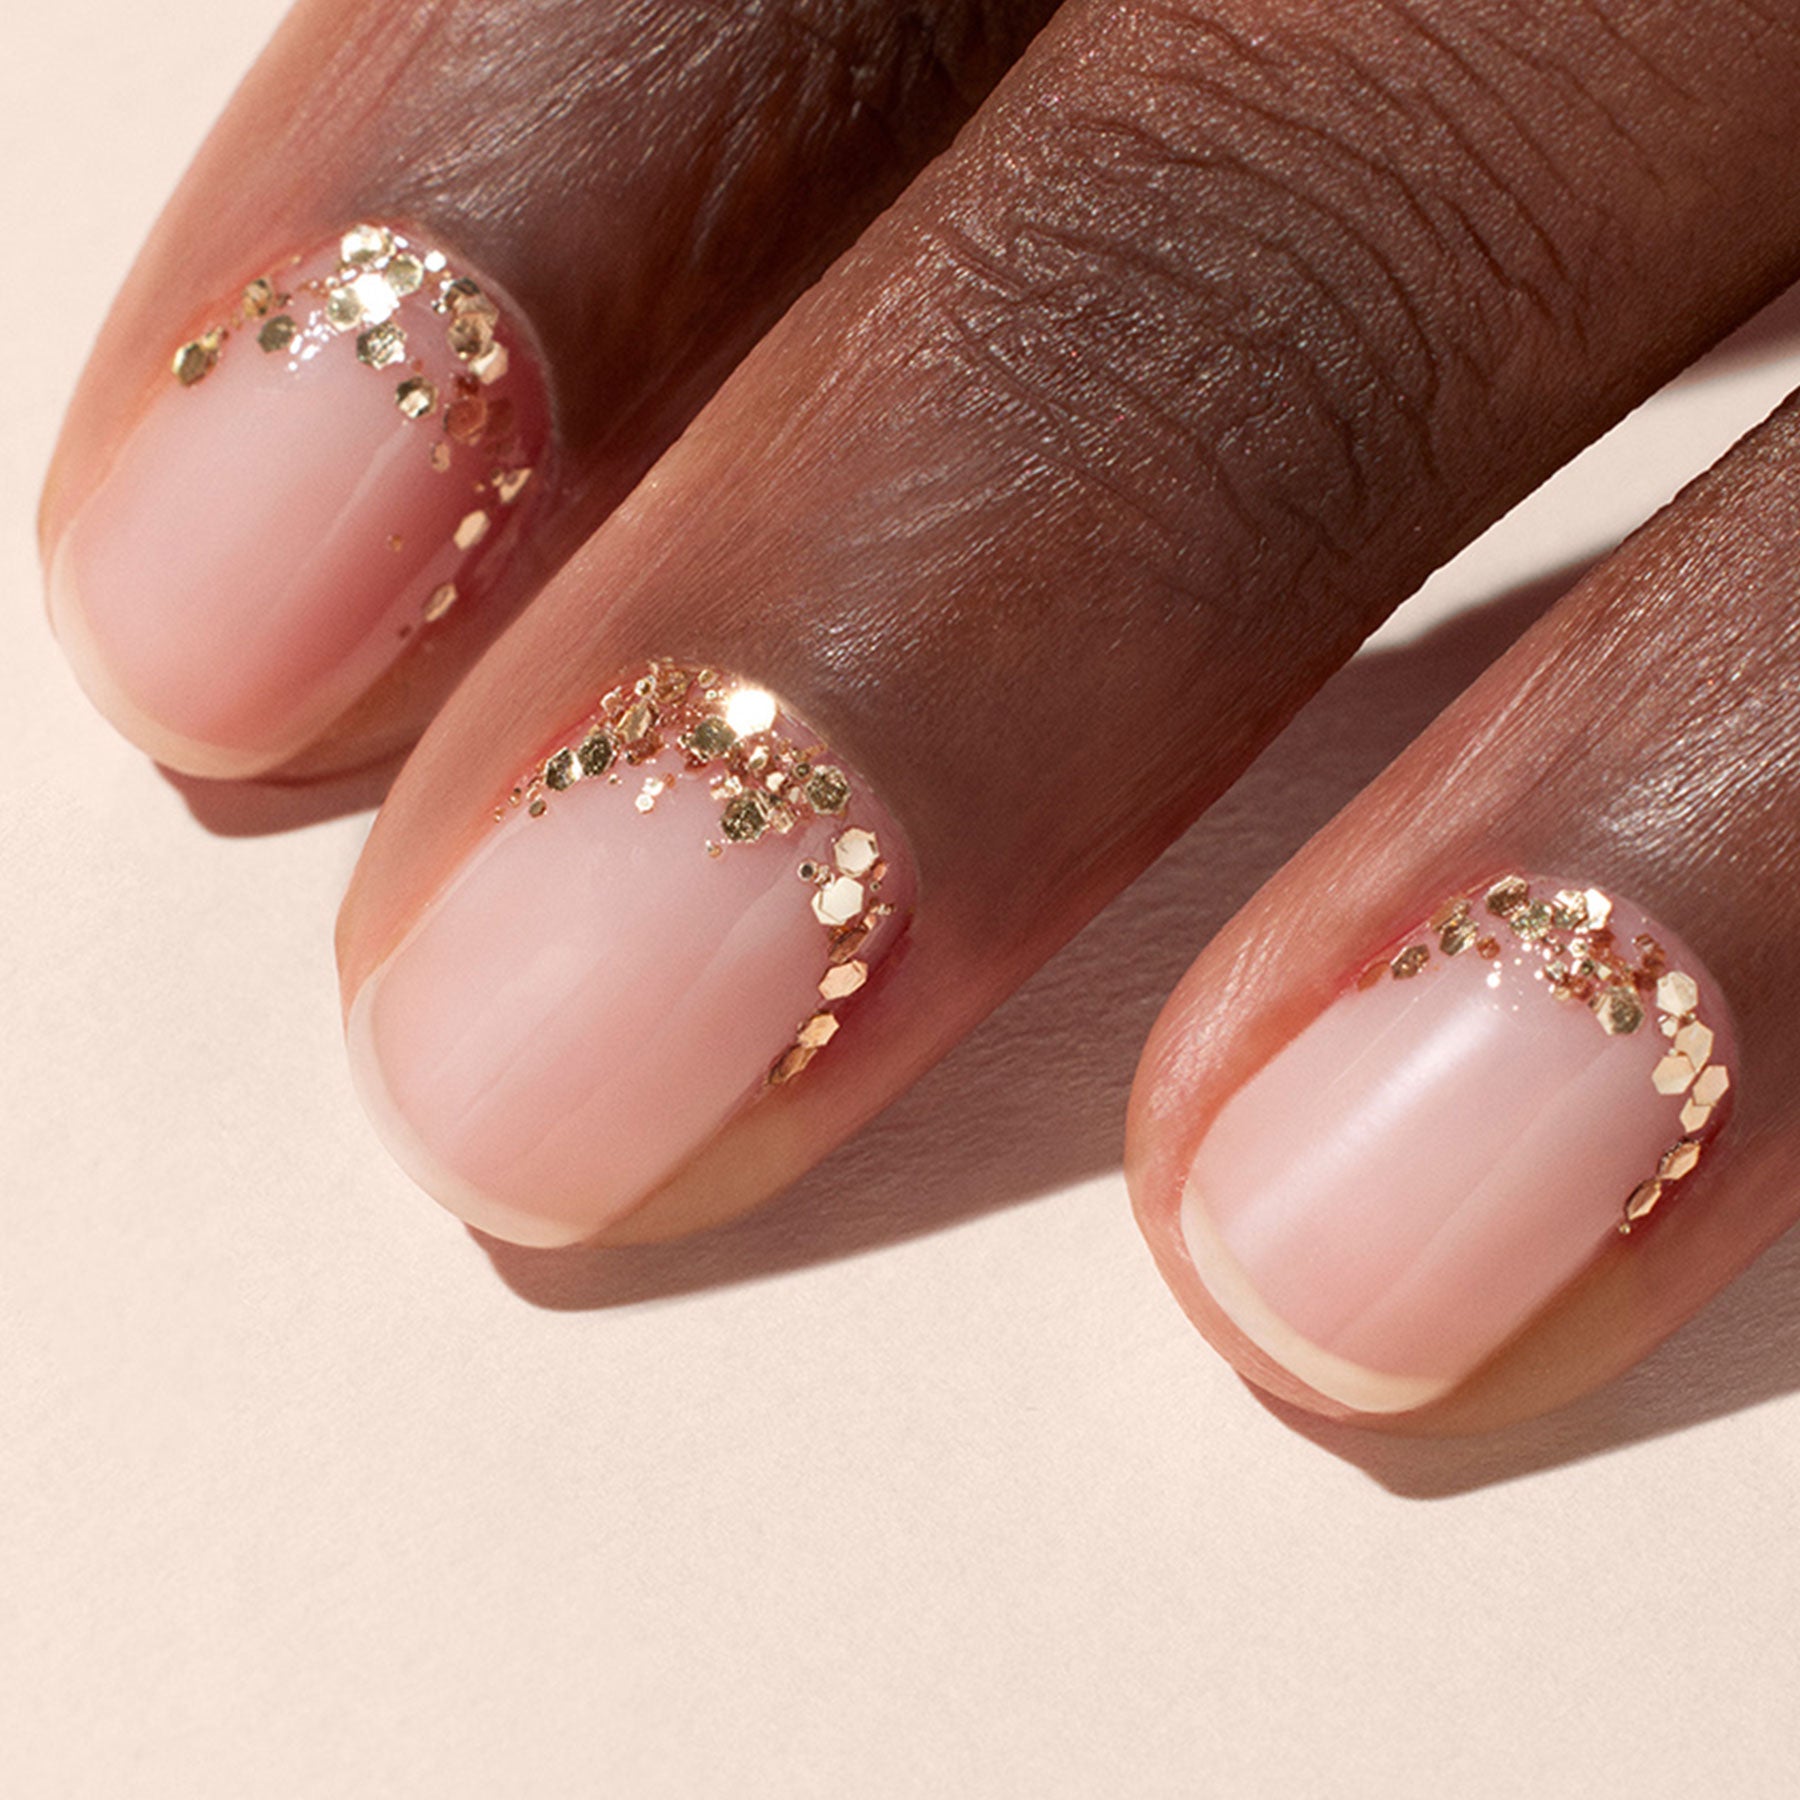 Pin by Aiko De Leon on Nails | Rose gold nails glitter, Rose gold nails,  Gold glitter nails